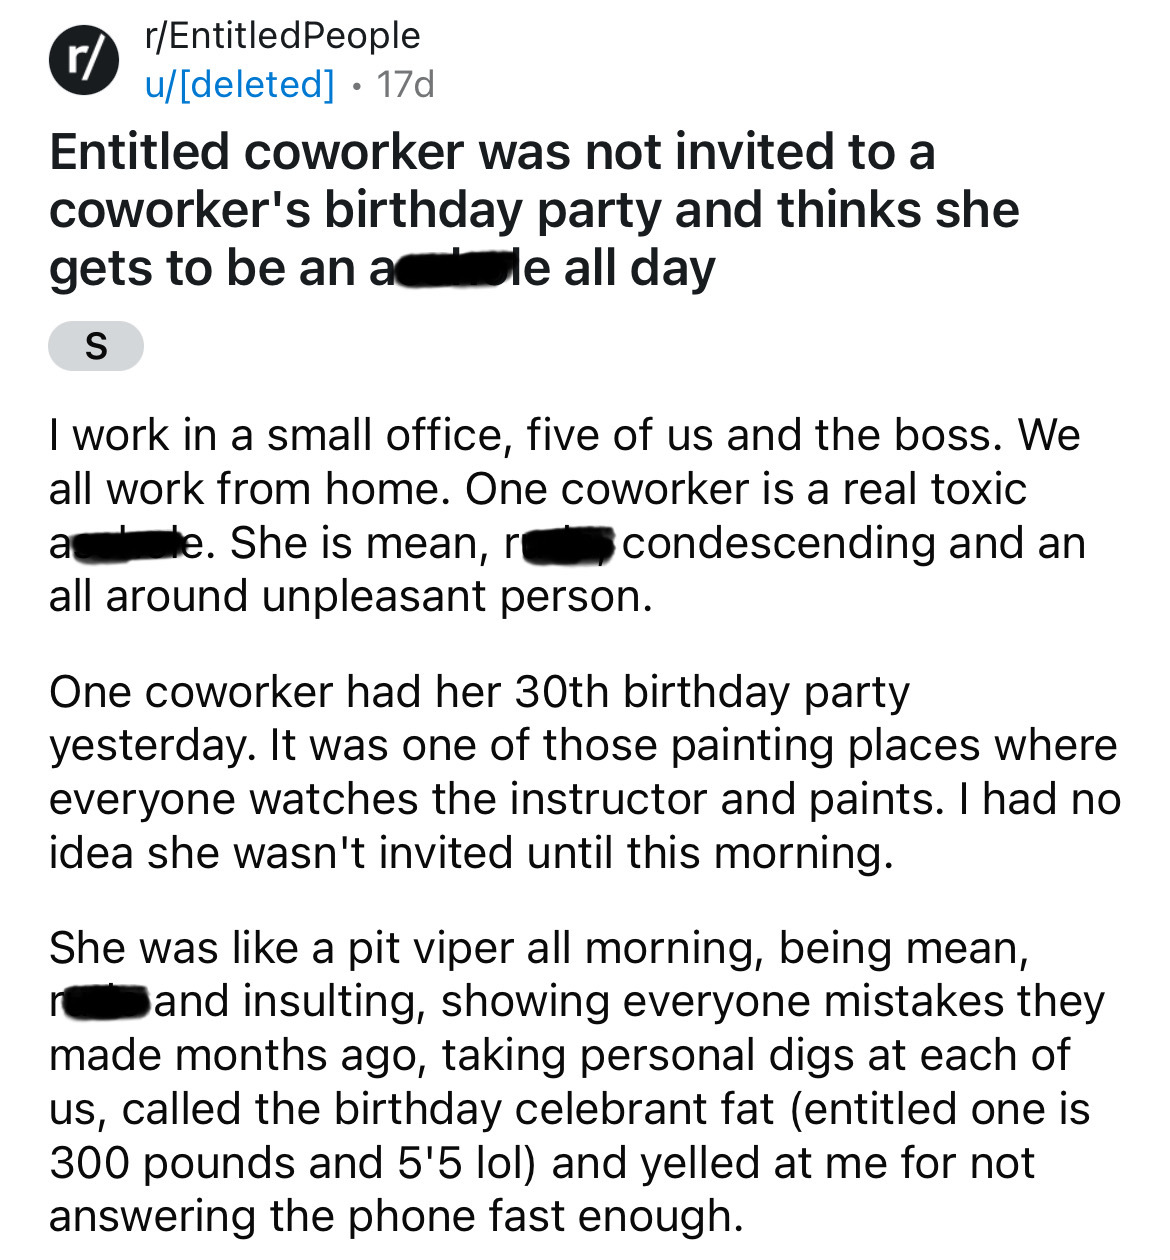 document - r rEntitled People udeleted 17d Entitled coworker was not invited to a coworker's birthday party and thinks she gets to be an ale all day S I work in a small office, five of us and the boss. We all work from home. One coworker is a real toxic a